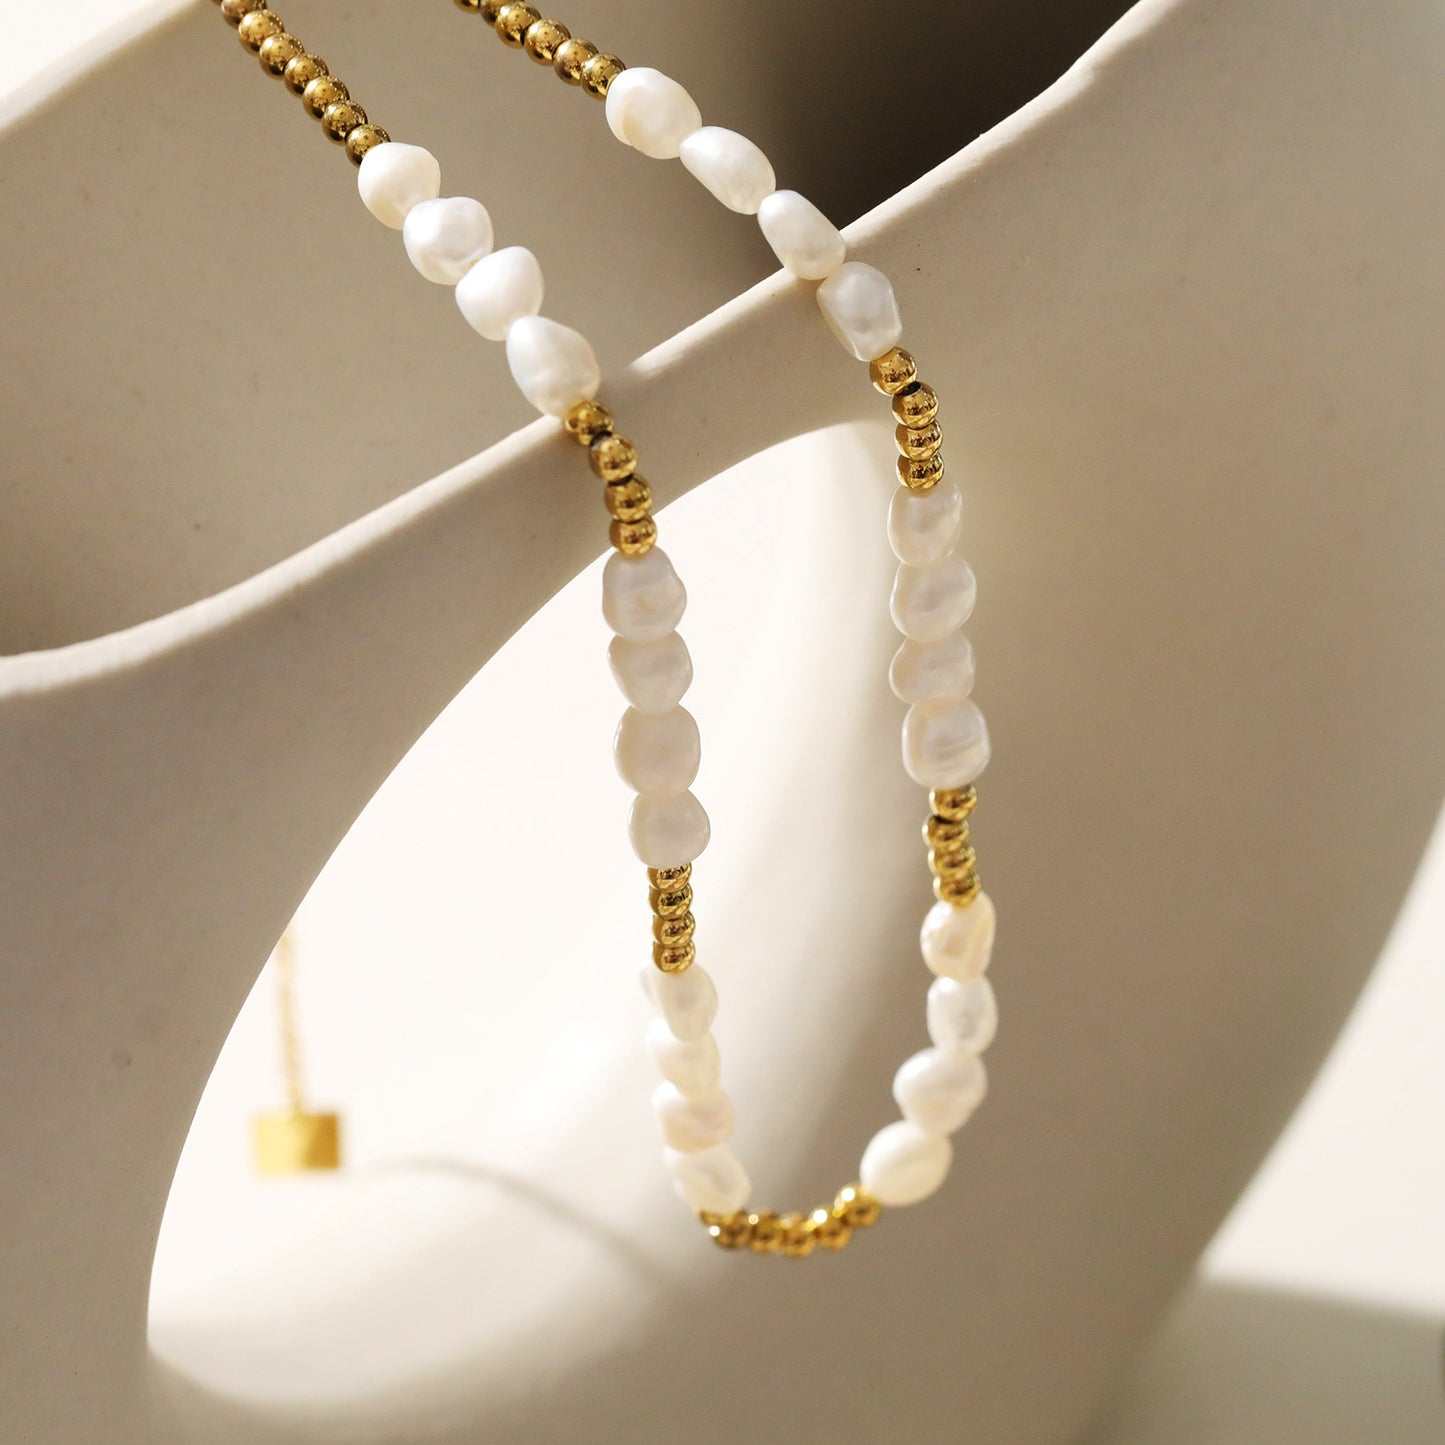 HELGA: Strands of Beauty - Mixed Ball-Beads and Pearls Necklace